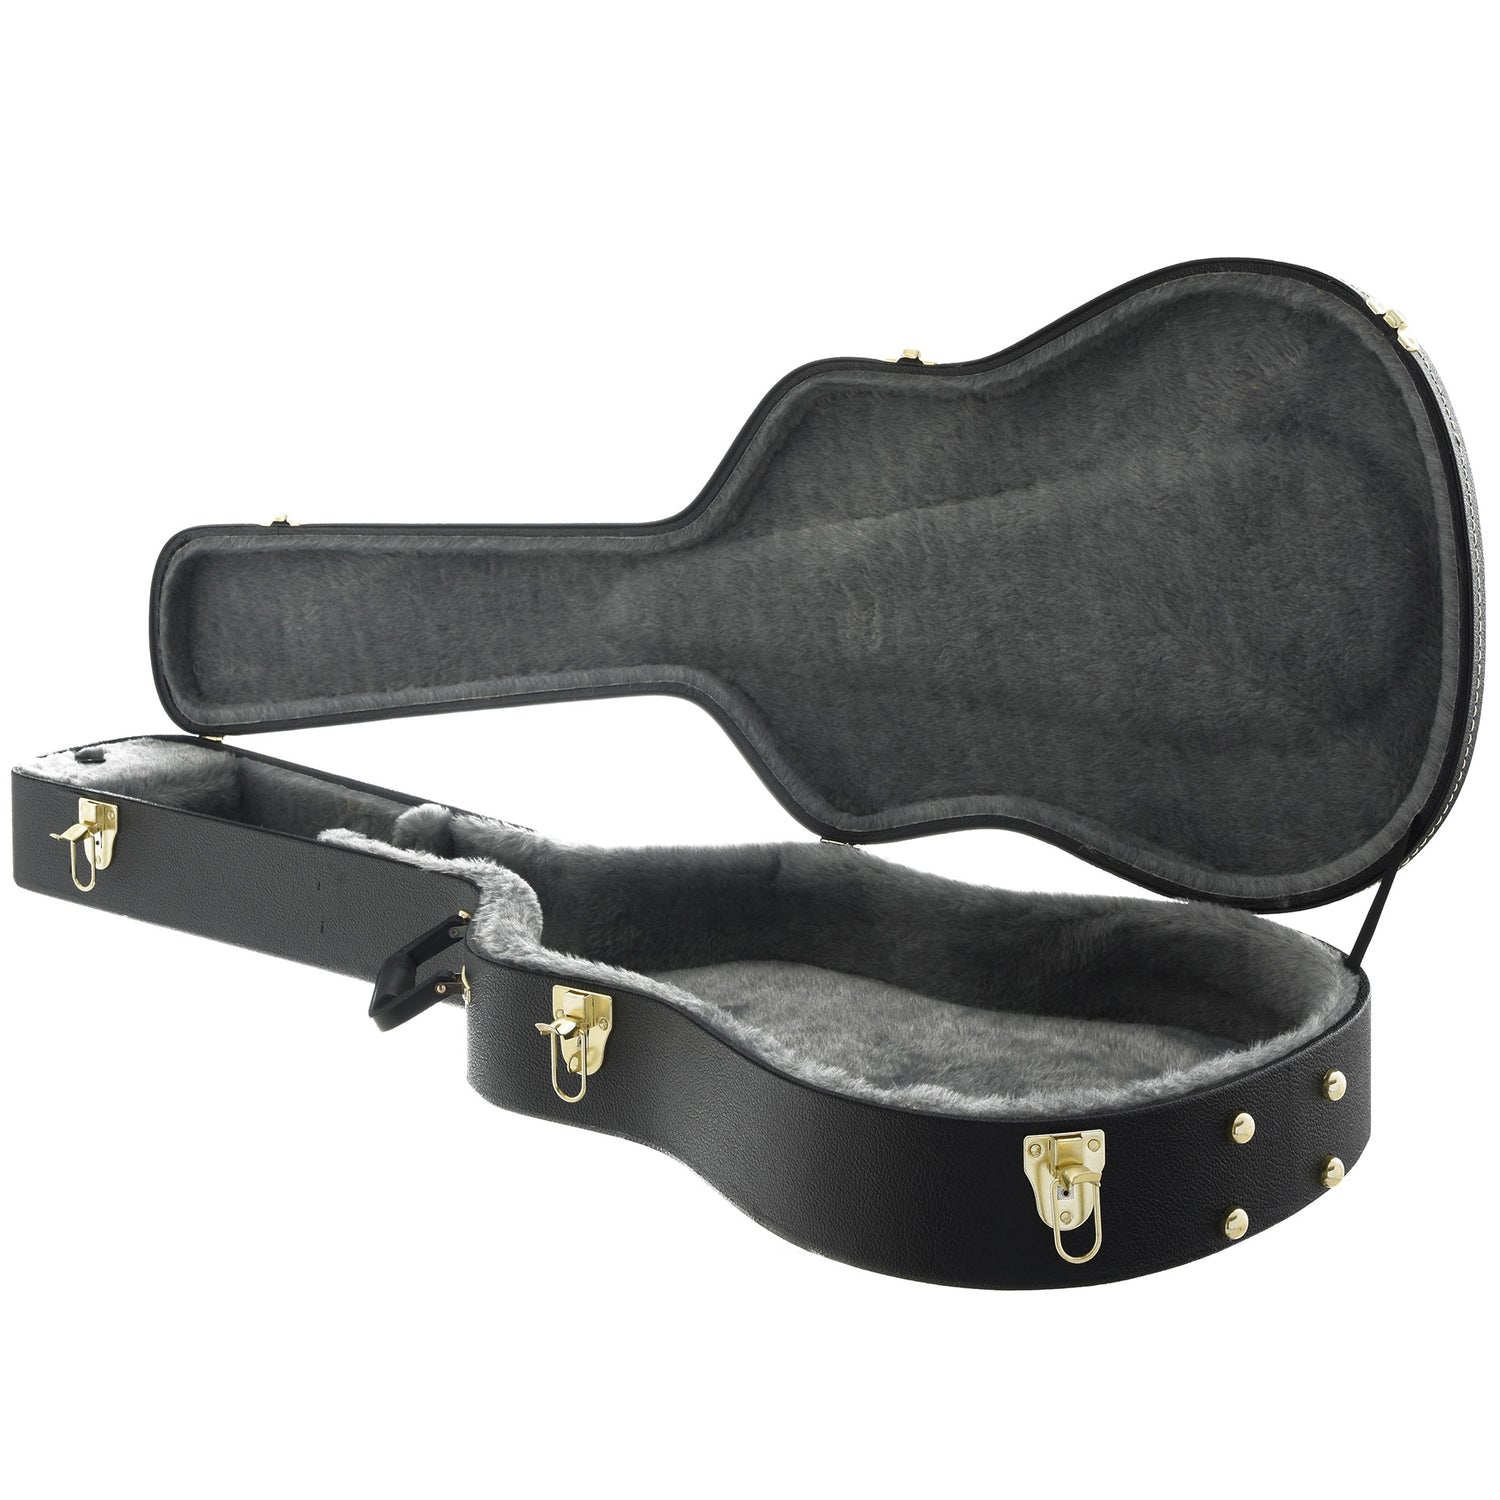 Image 2 of Gold Tone Weissenborn Hardshell Case - SKU# GCGT-WEISS : Product Type Accessories & Parts : Elderly Instruments